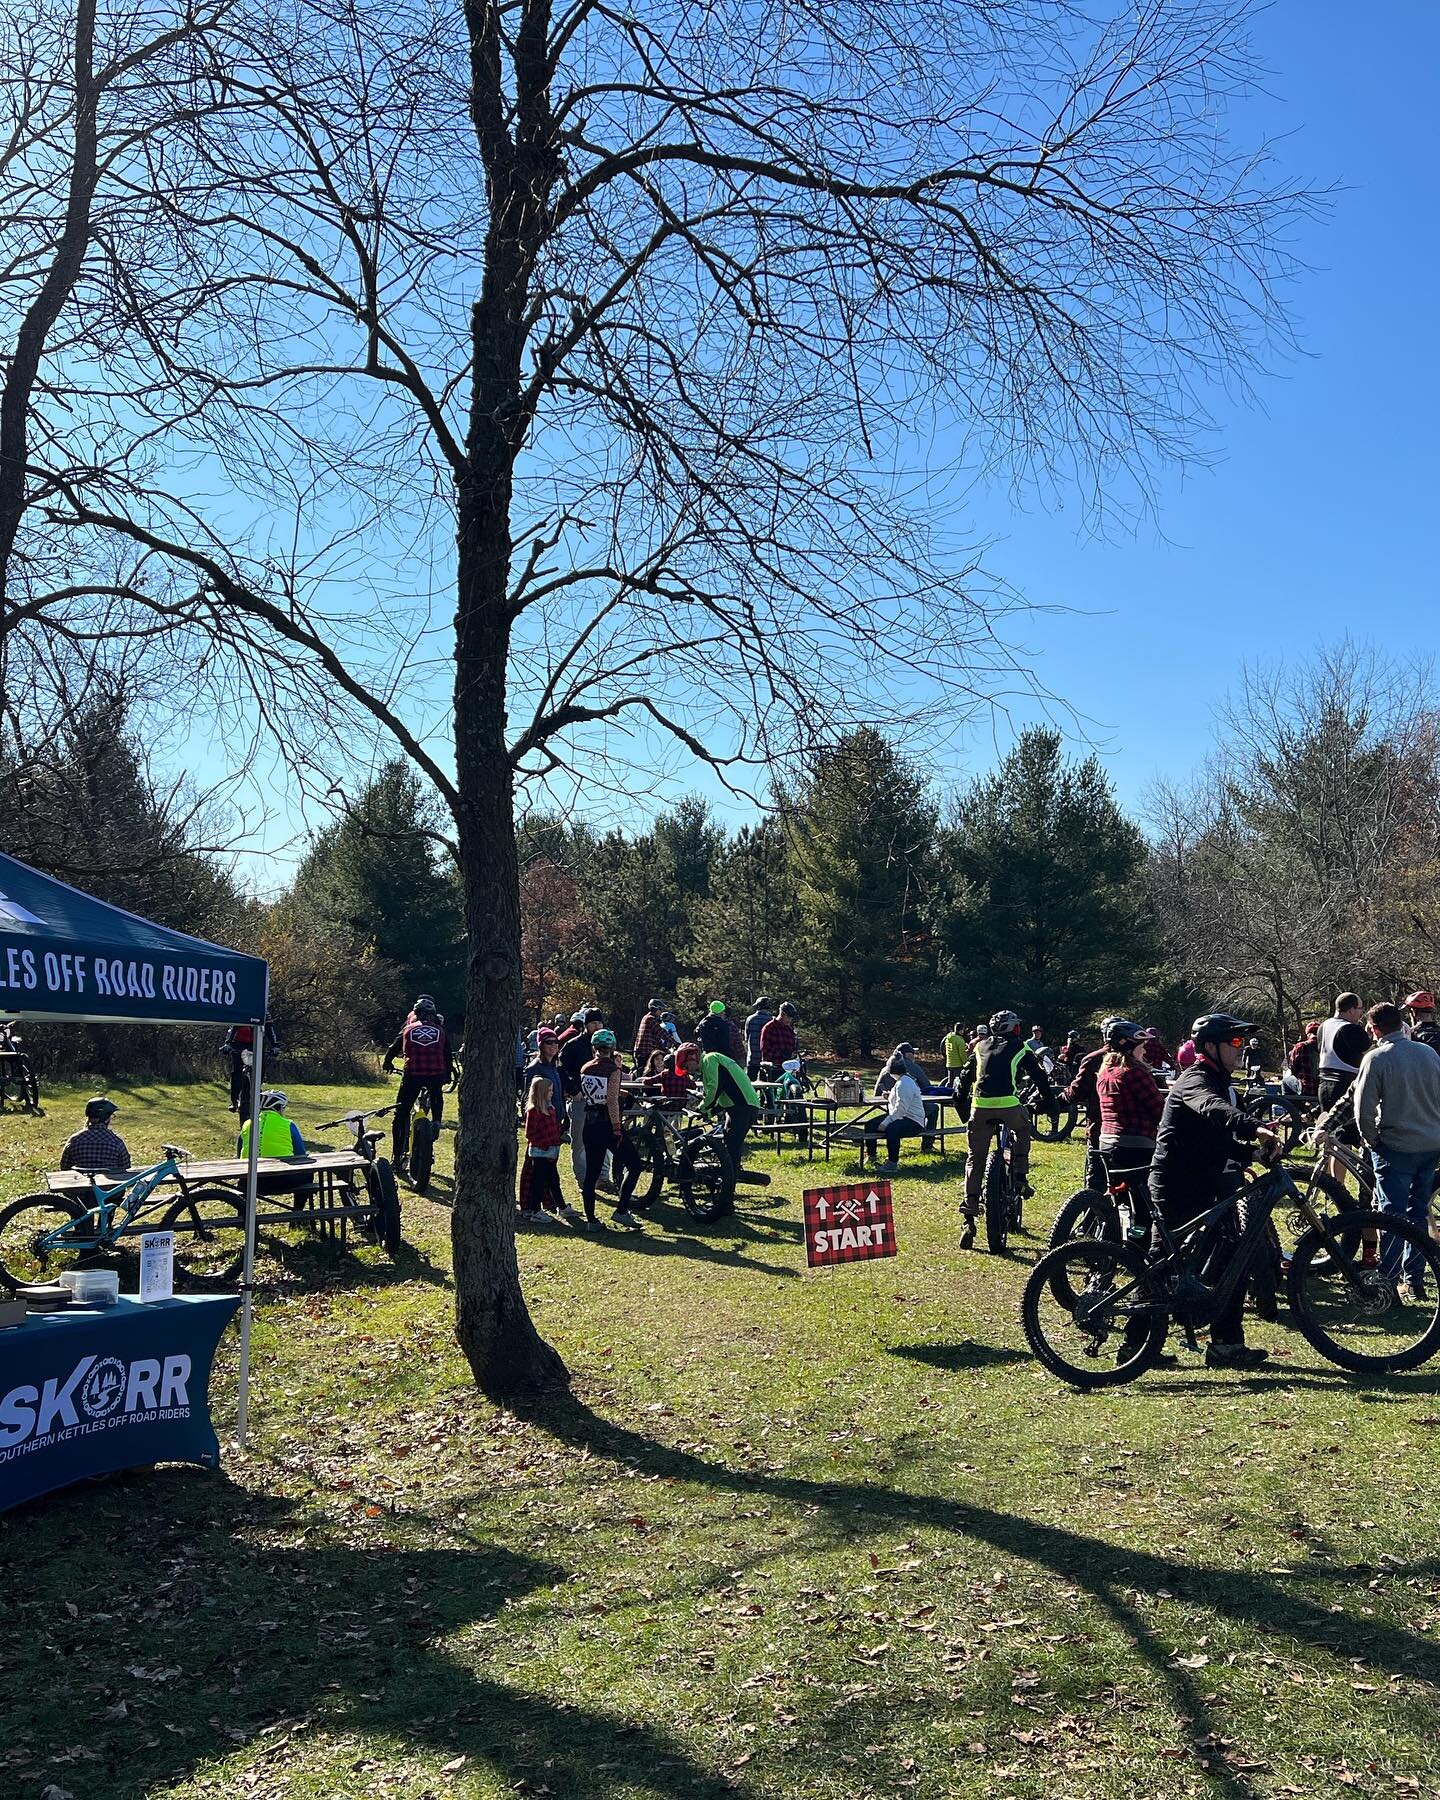 A perfect day to be at John Muir for the 1st @hughjassfatbikeseries race of the season! What a great event @wheelandsprocket! Thanks for allowing us to be a part of it. Thanks to all the people that came out for the day! We had a huge 😜 crowd!

#joh